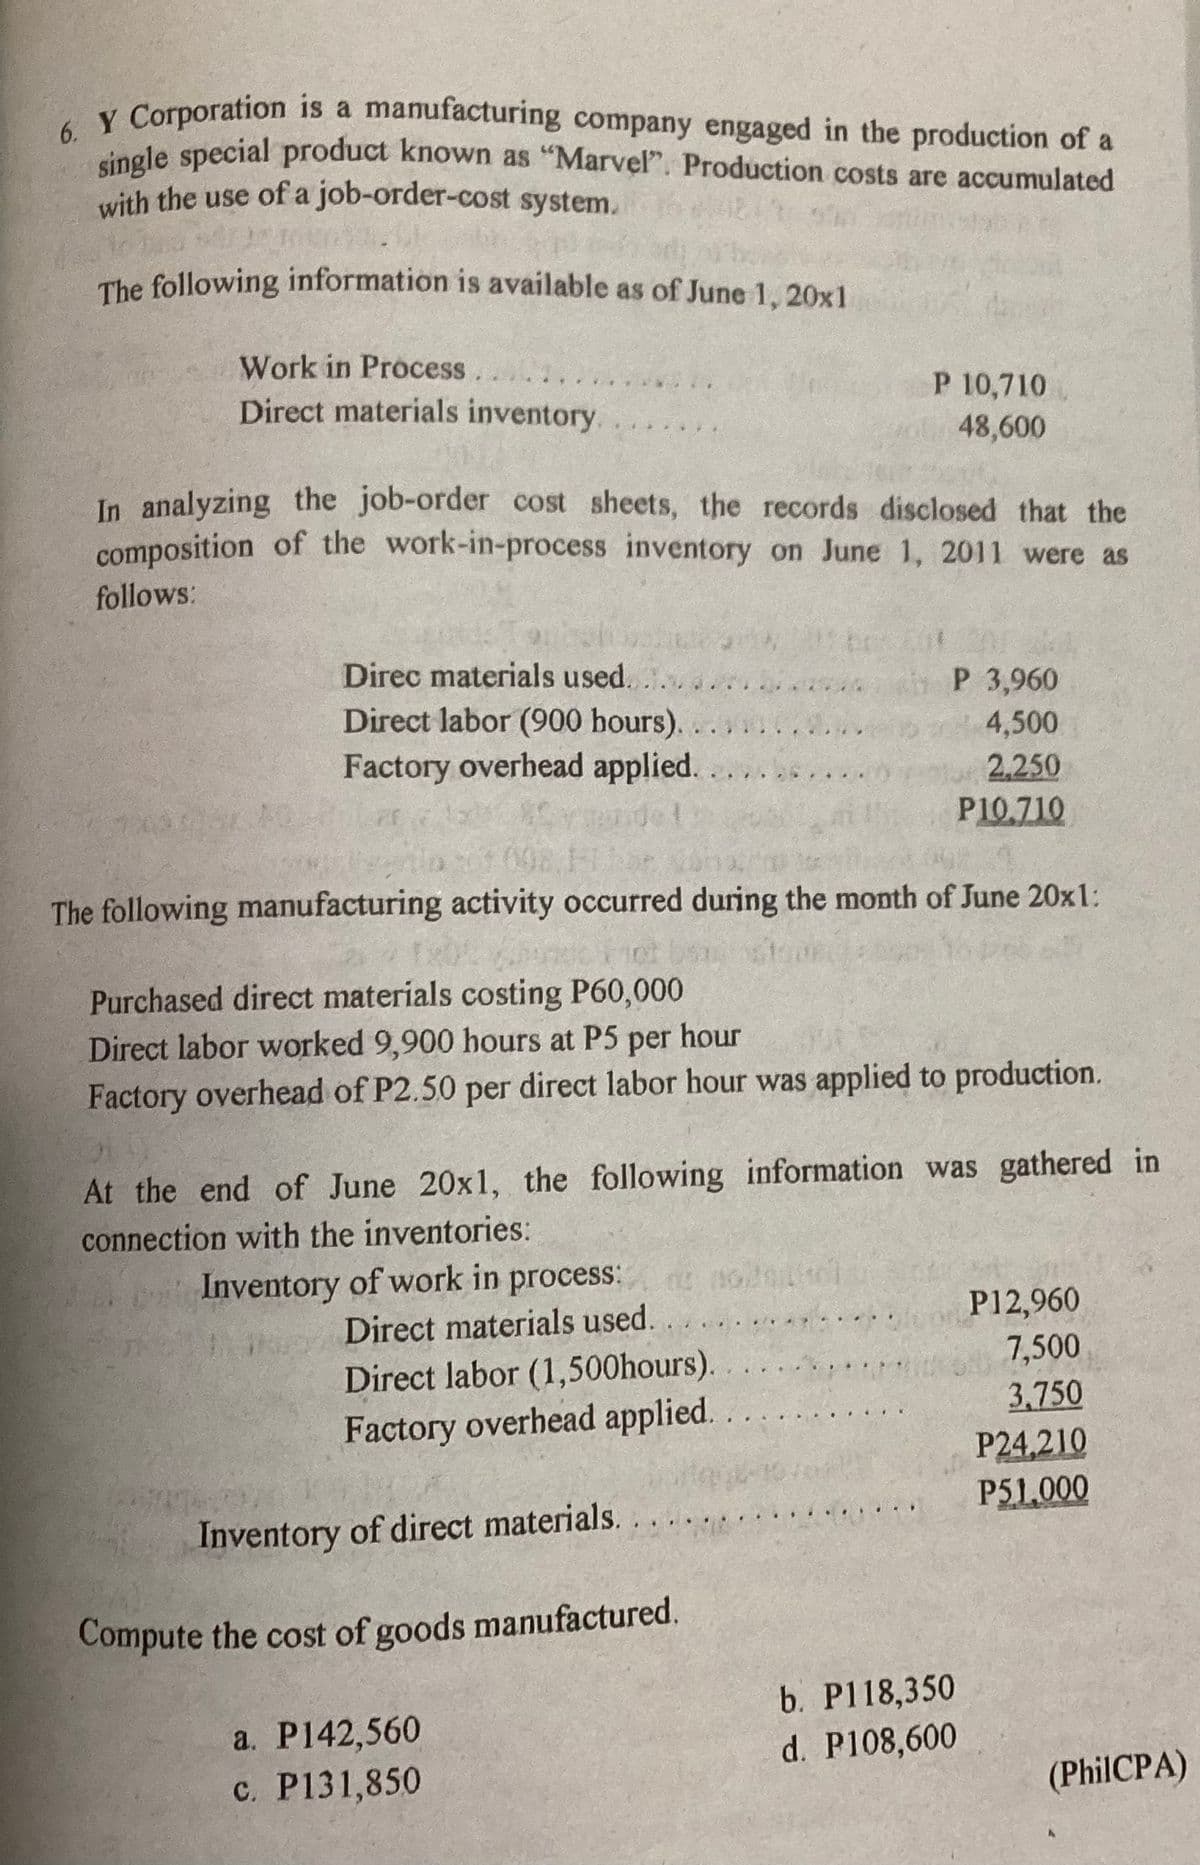 6. Y Corporation is a manufacturing company engaged in the production of a
single special product known as "Marvel". Production costs are accumulated
with the use of a job-order-cost system.
ausdr
The following information is available as of June 1, 20x1
Work in Process
Direct materials inventory.
In analyzing the job-order cost sheets, the records disclosed that the
composition of the work-in-process inventory on June 1, 2011 were as
follows:
Direc materials used.
Direct labor (900 hours)..........
Factory overhead applied.
*Cymuide!
The following manufacturing activity occurred during the month of June 20x1:
Pune For b
Purchased direct materials costing P60,000
Direct labor worked 9,900 hours at P5 per hour
Factory overhead of P2.50 per direct labor hour was applied to production.
P 10,710
48,600
At the end of June 20x1, the following information was gathered in
connection with the inventories:
Inventory of work in process:
Direct materials used.
Direct labor (1,500hours).
Factory overhead applied.
000001
Inventory of direct materials.
Compute the cost of goods manufactured.
a. P142,560
c. P131,850
P 3,960
4,500
2,250
P10.710
.....
b. P118,350
d. P108,600
P12,960
7,500
3.750
P24,210
P51,000
(PhilCPA)